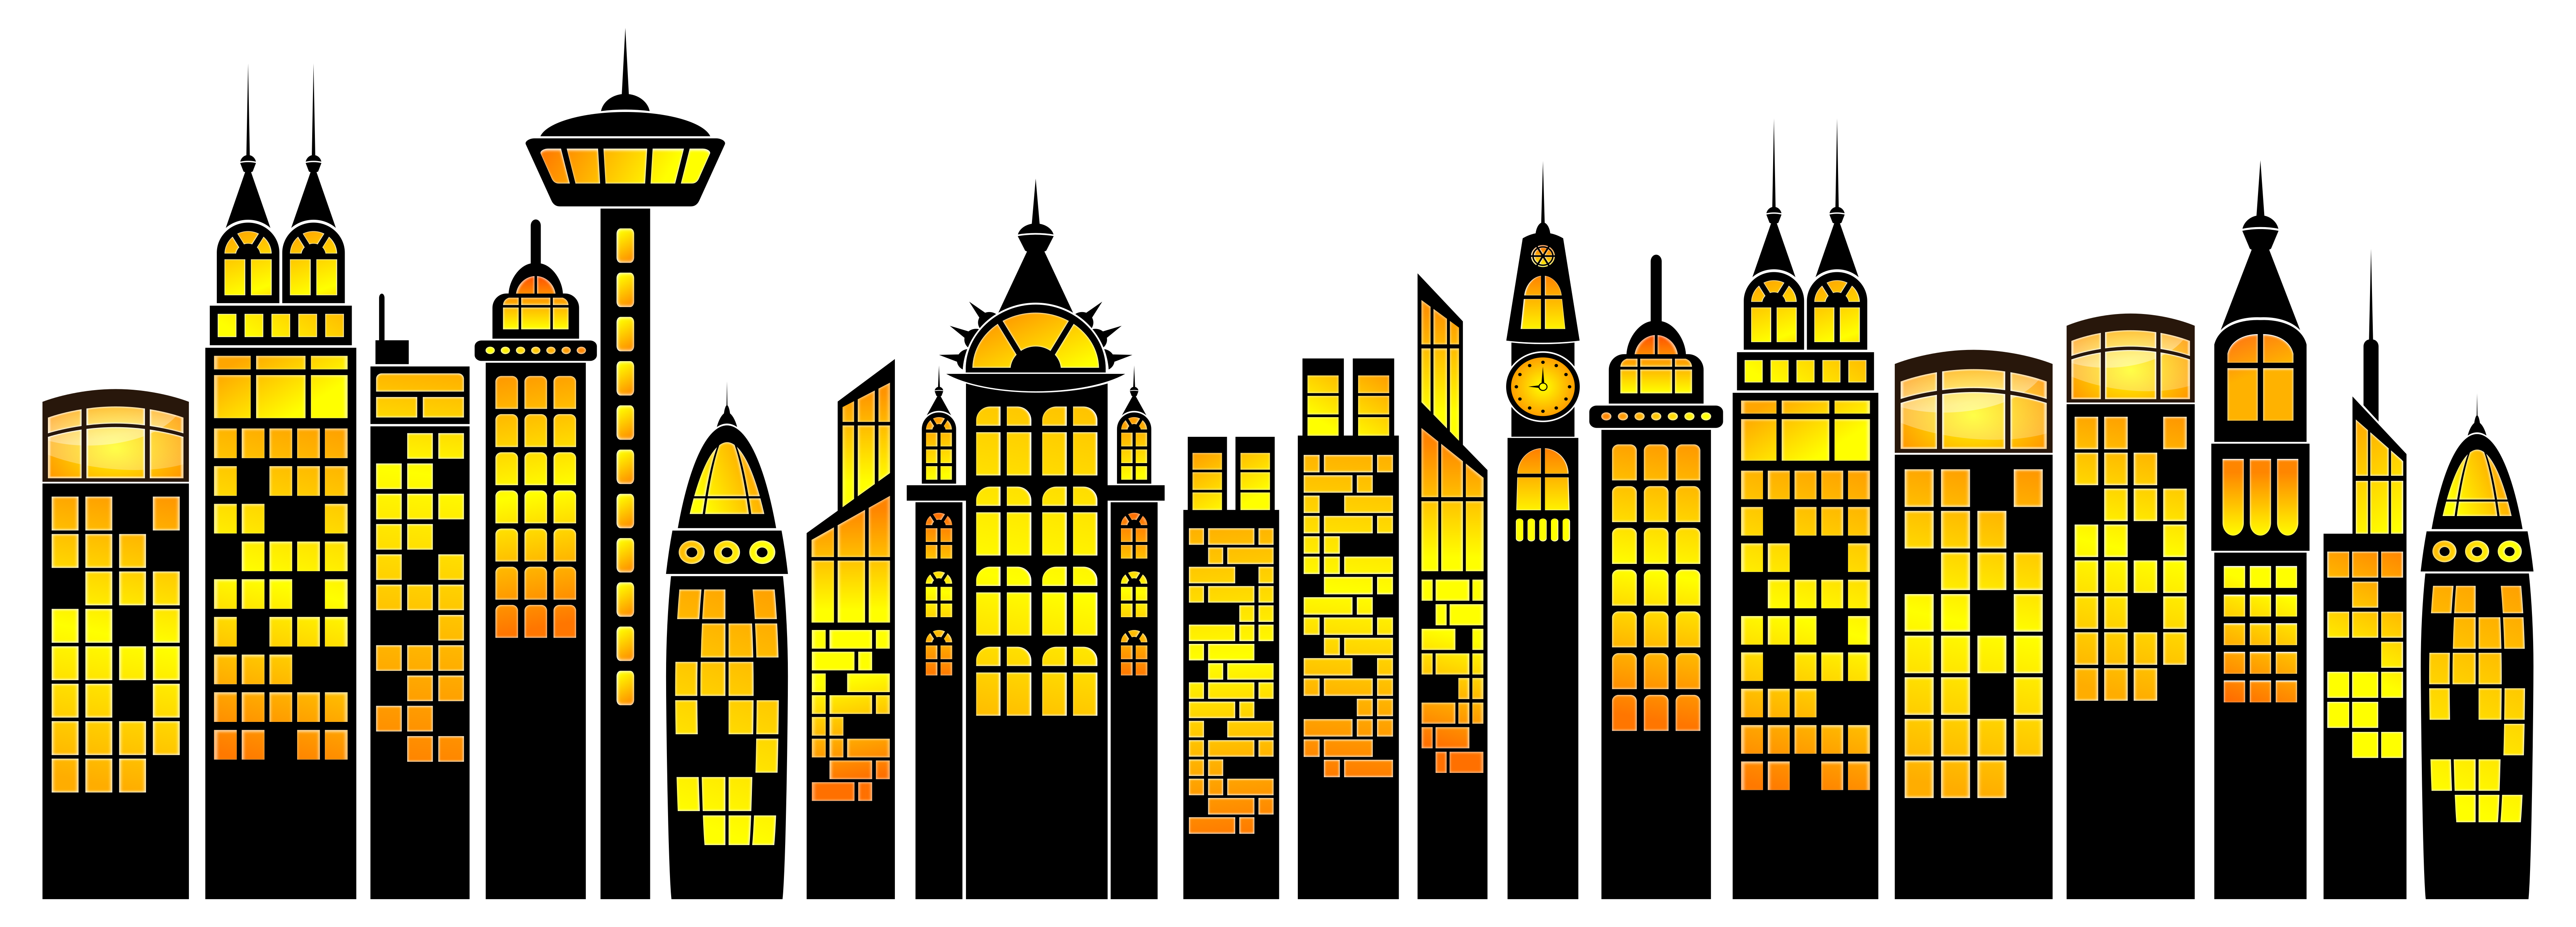 Cityscape clipart biulding. Simple buildings by viscious